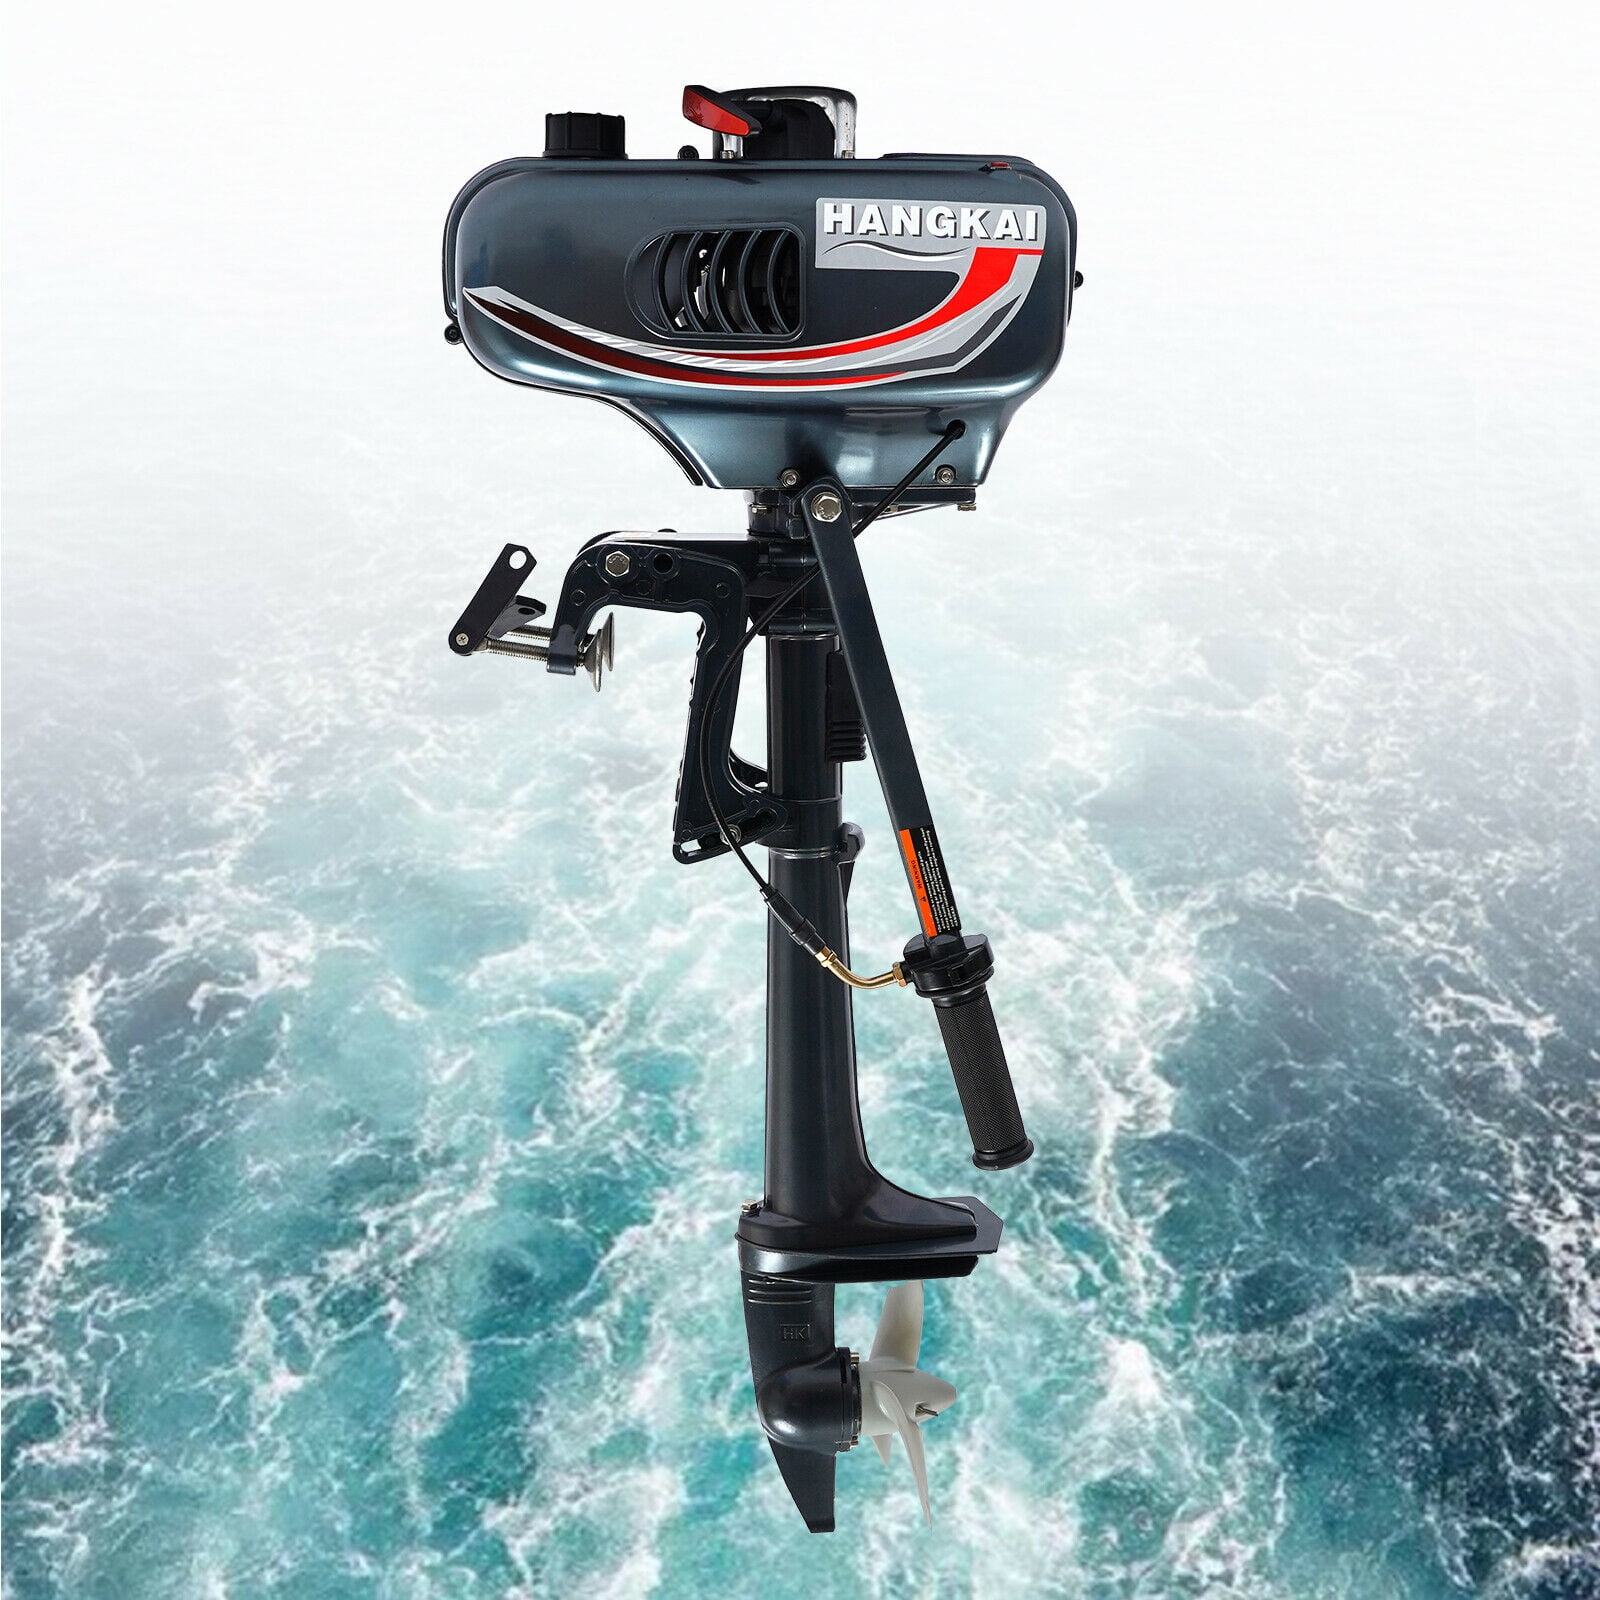 HANGKAI 2 Stroke Outboard Motor 2500W 3.5HP Fishing Boat Engine with CDI System 